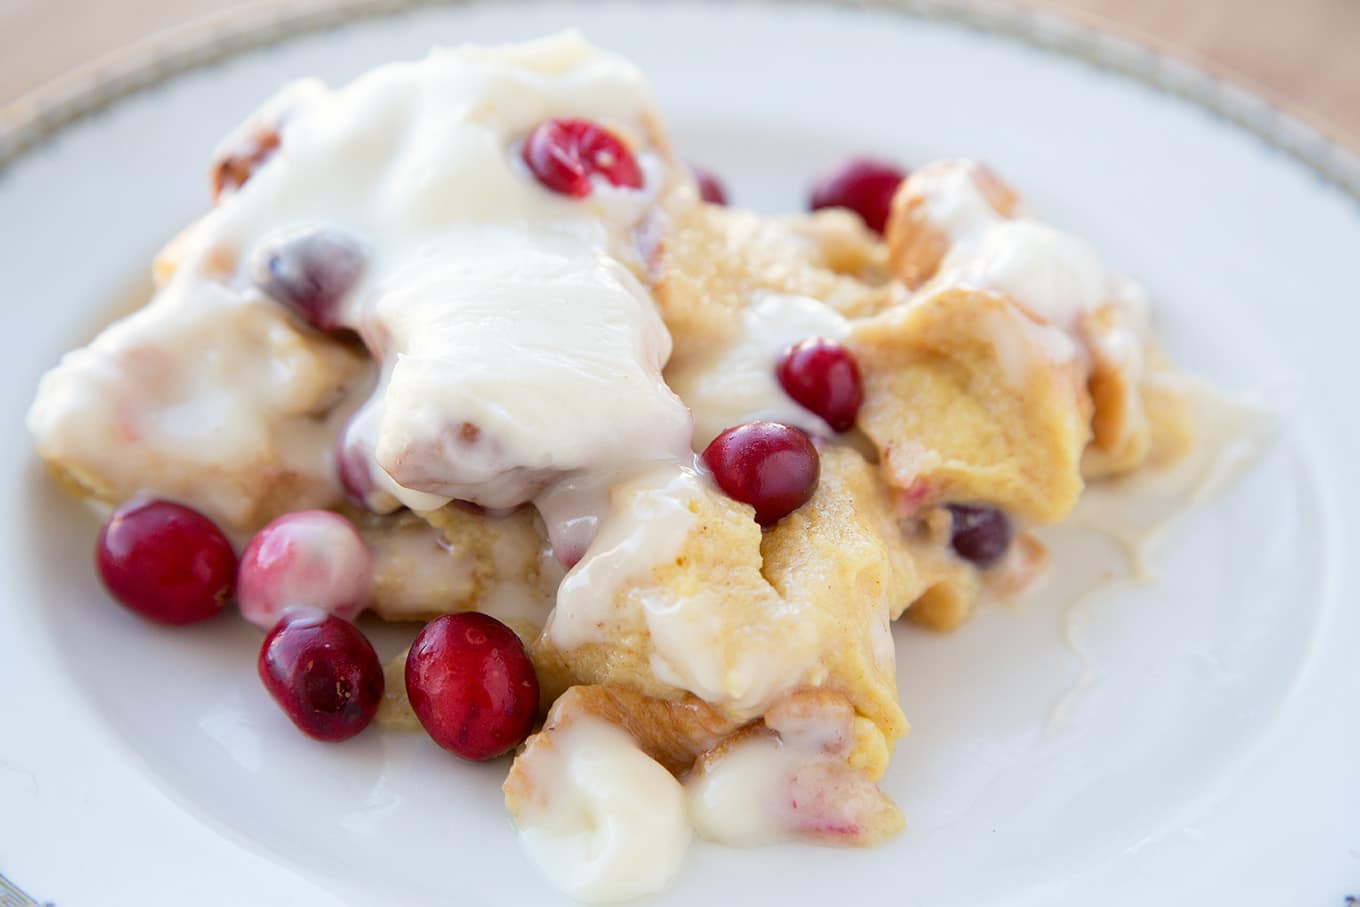 Cranberry Eggnog Bread Pudding with a Bourbon Cream Cheese Frosting